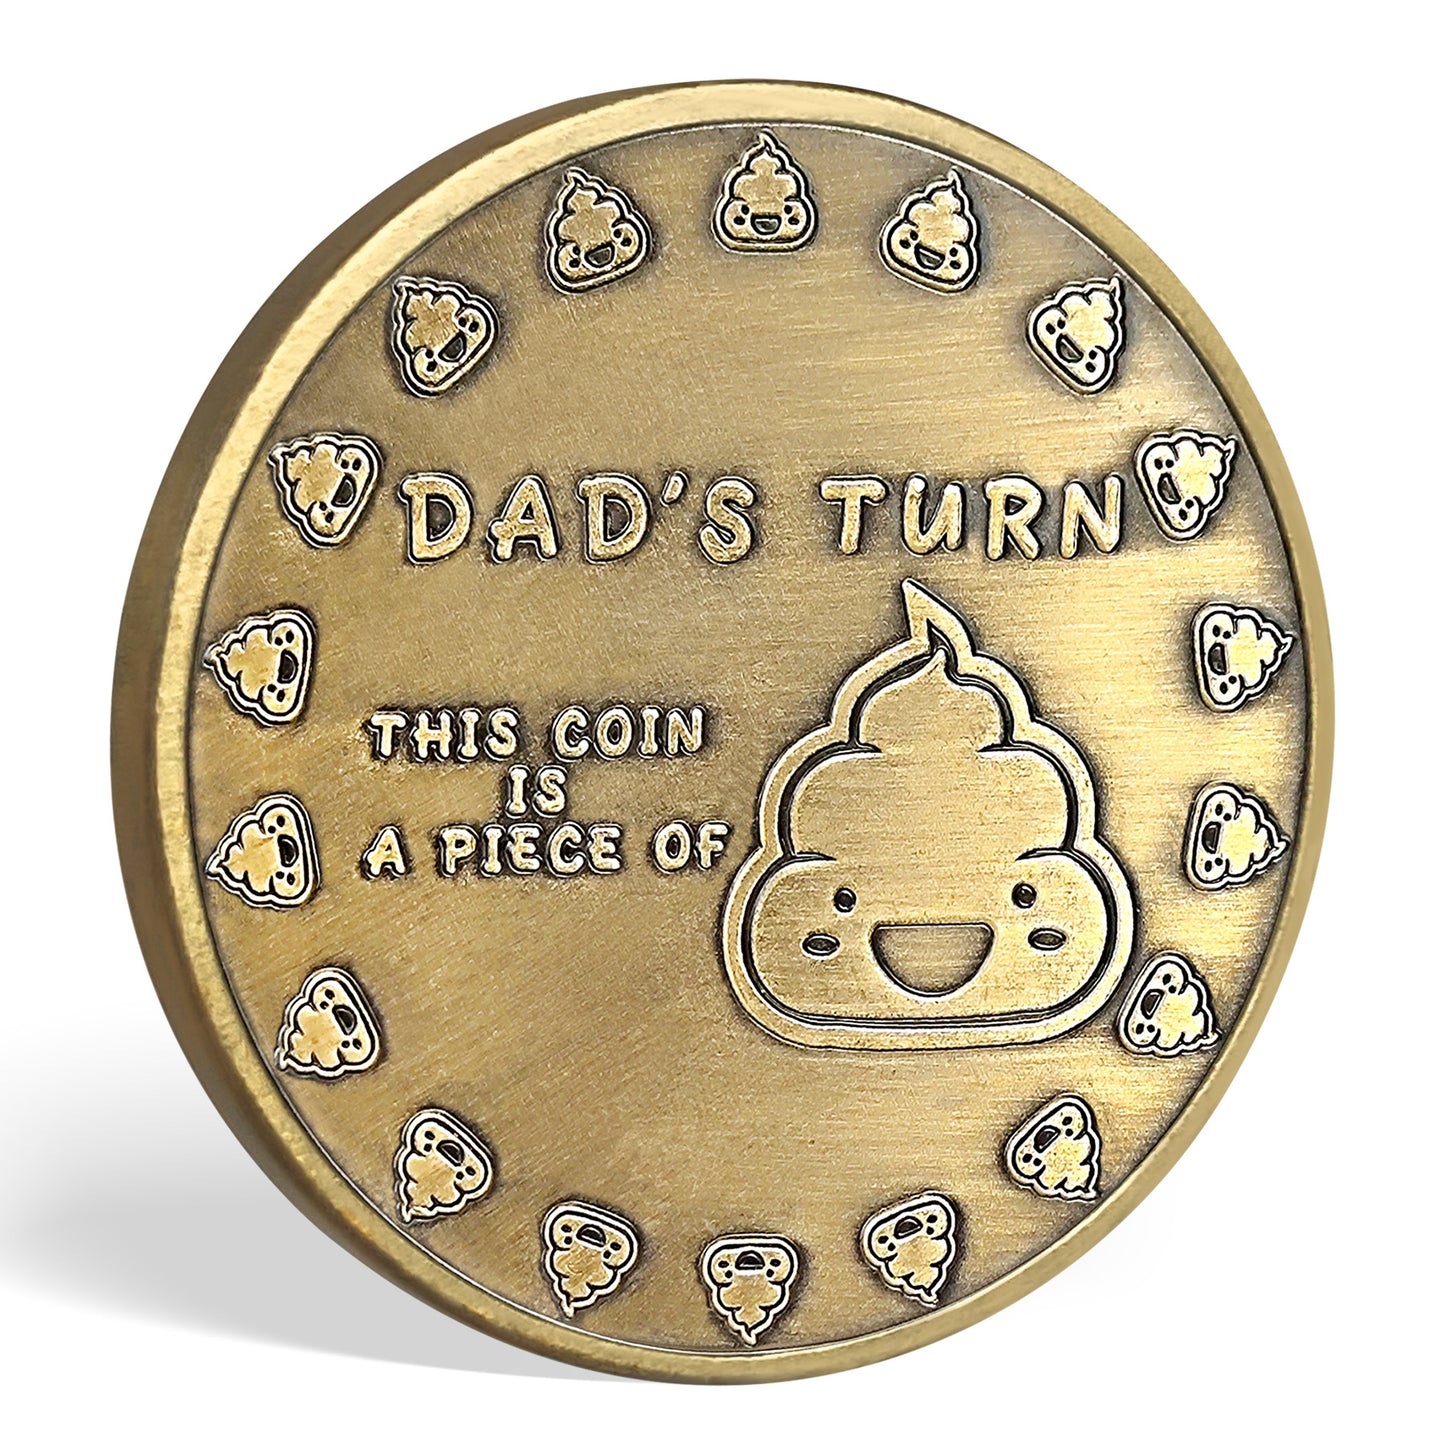 New Parents Decision Coin Mom's Turn Vs Dad's Turn Flip Coin